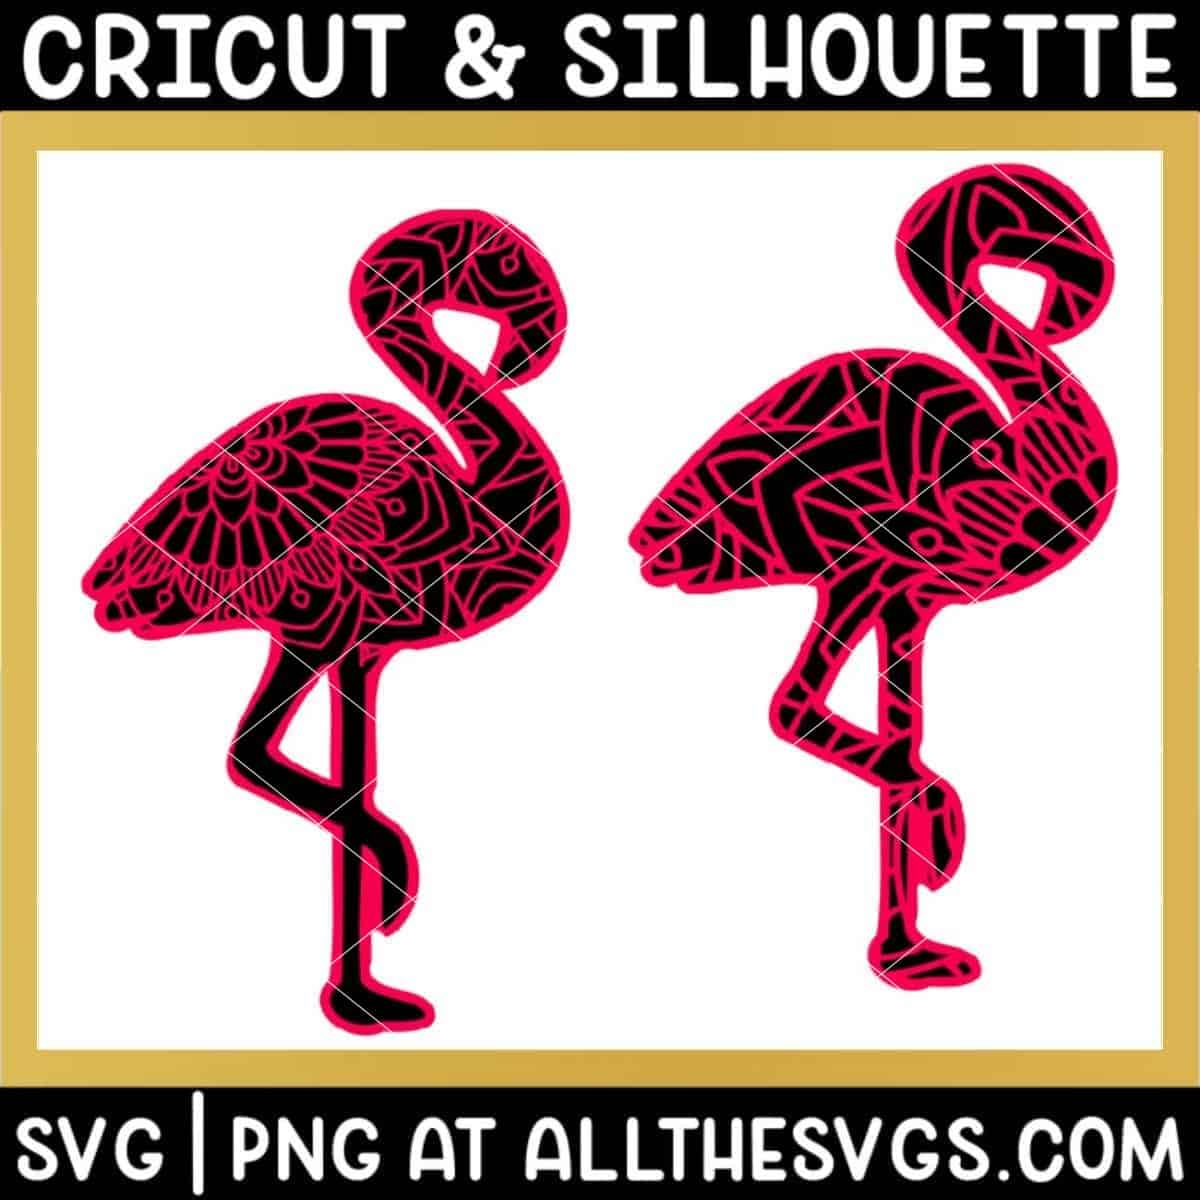 2 versions of flamingo svg file mandala on full body and top of body only.